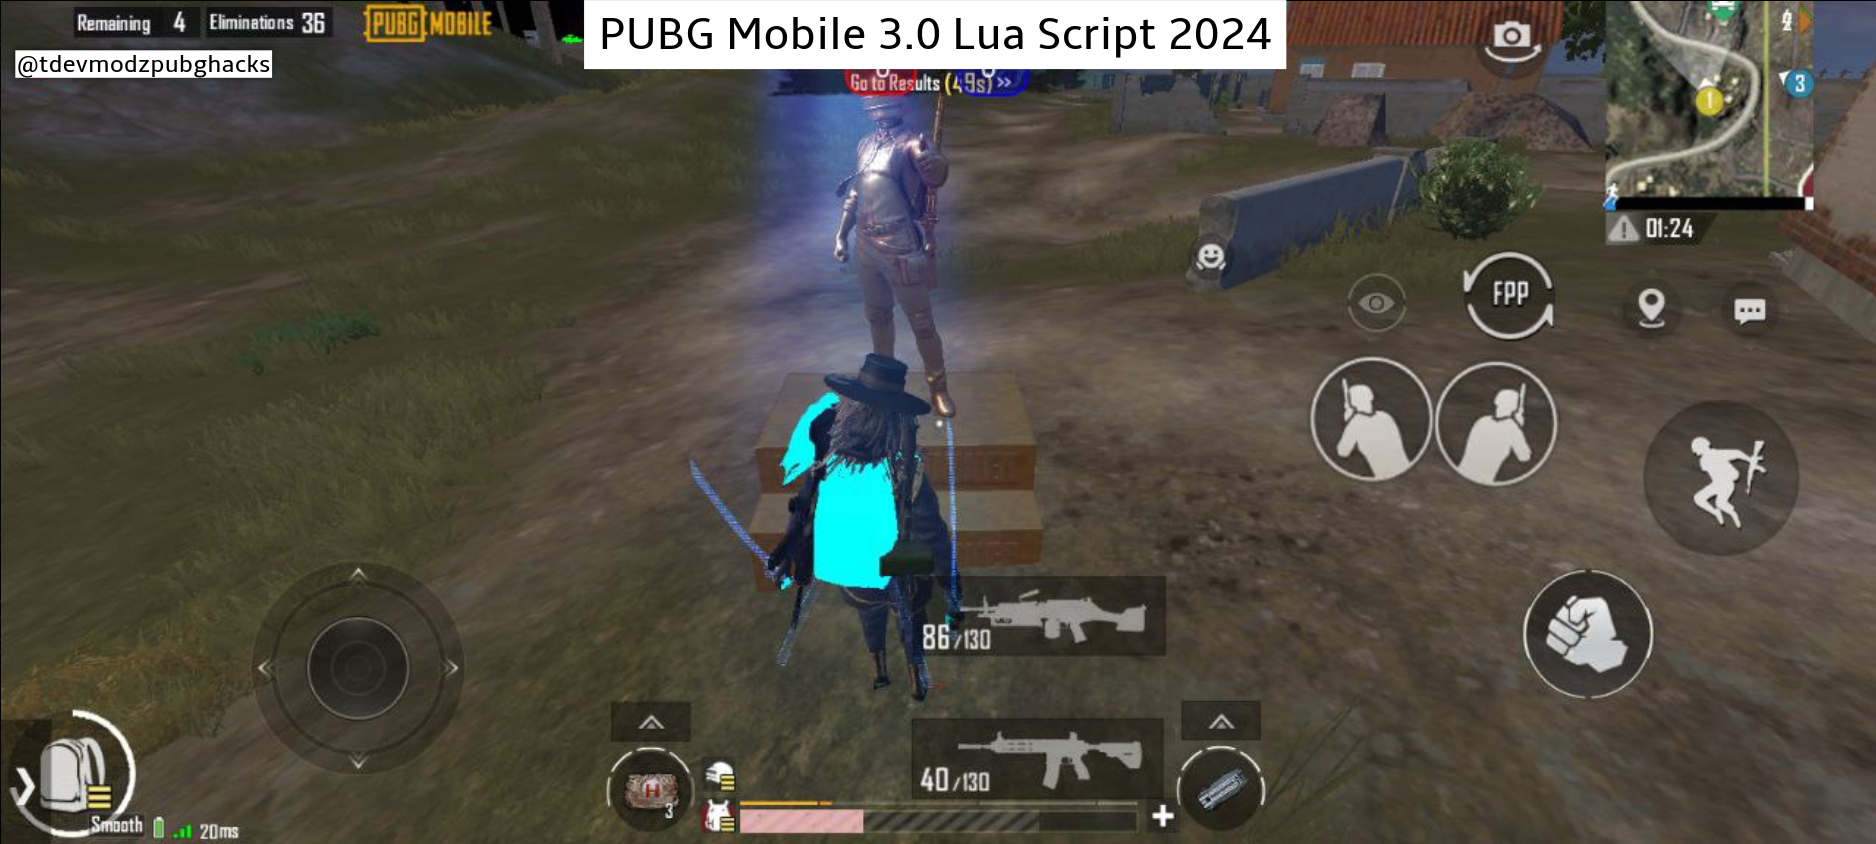 You are currently viewing PUBG Mobile 3.0 Lua Script 2024